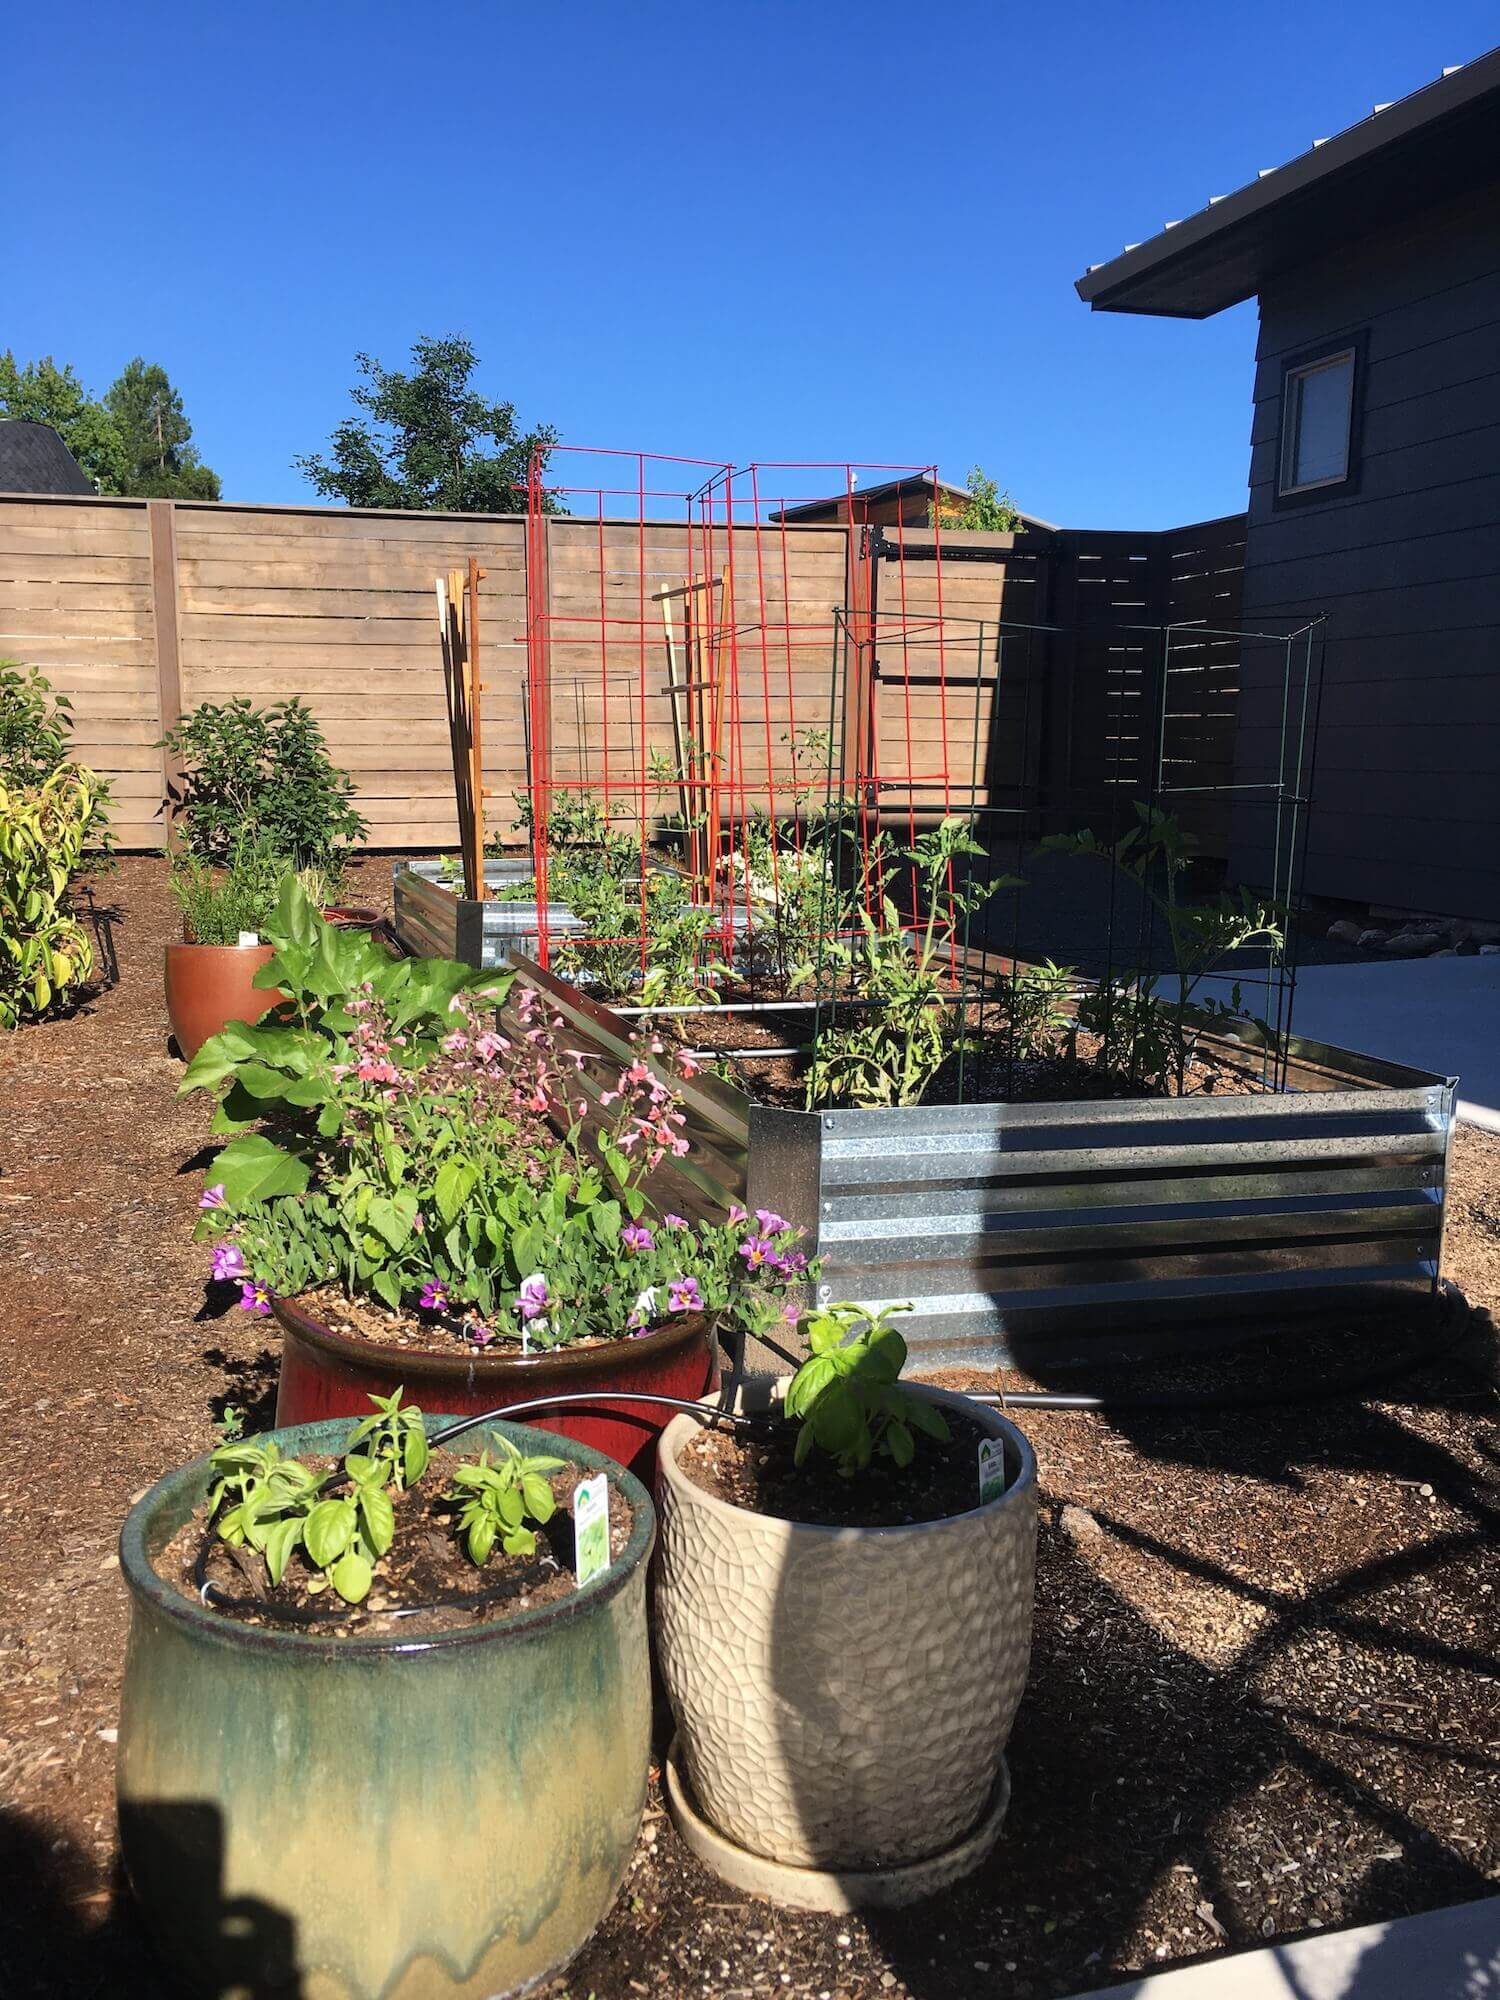 pots of flowers in front of raised aluminum beds with tomato cages and plants, along side the raised beds are sunflowers straining for the sun, and in the back bed you see trellises waiting for veggies